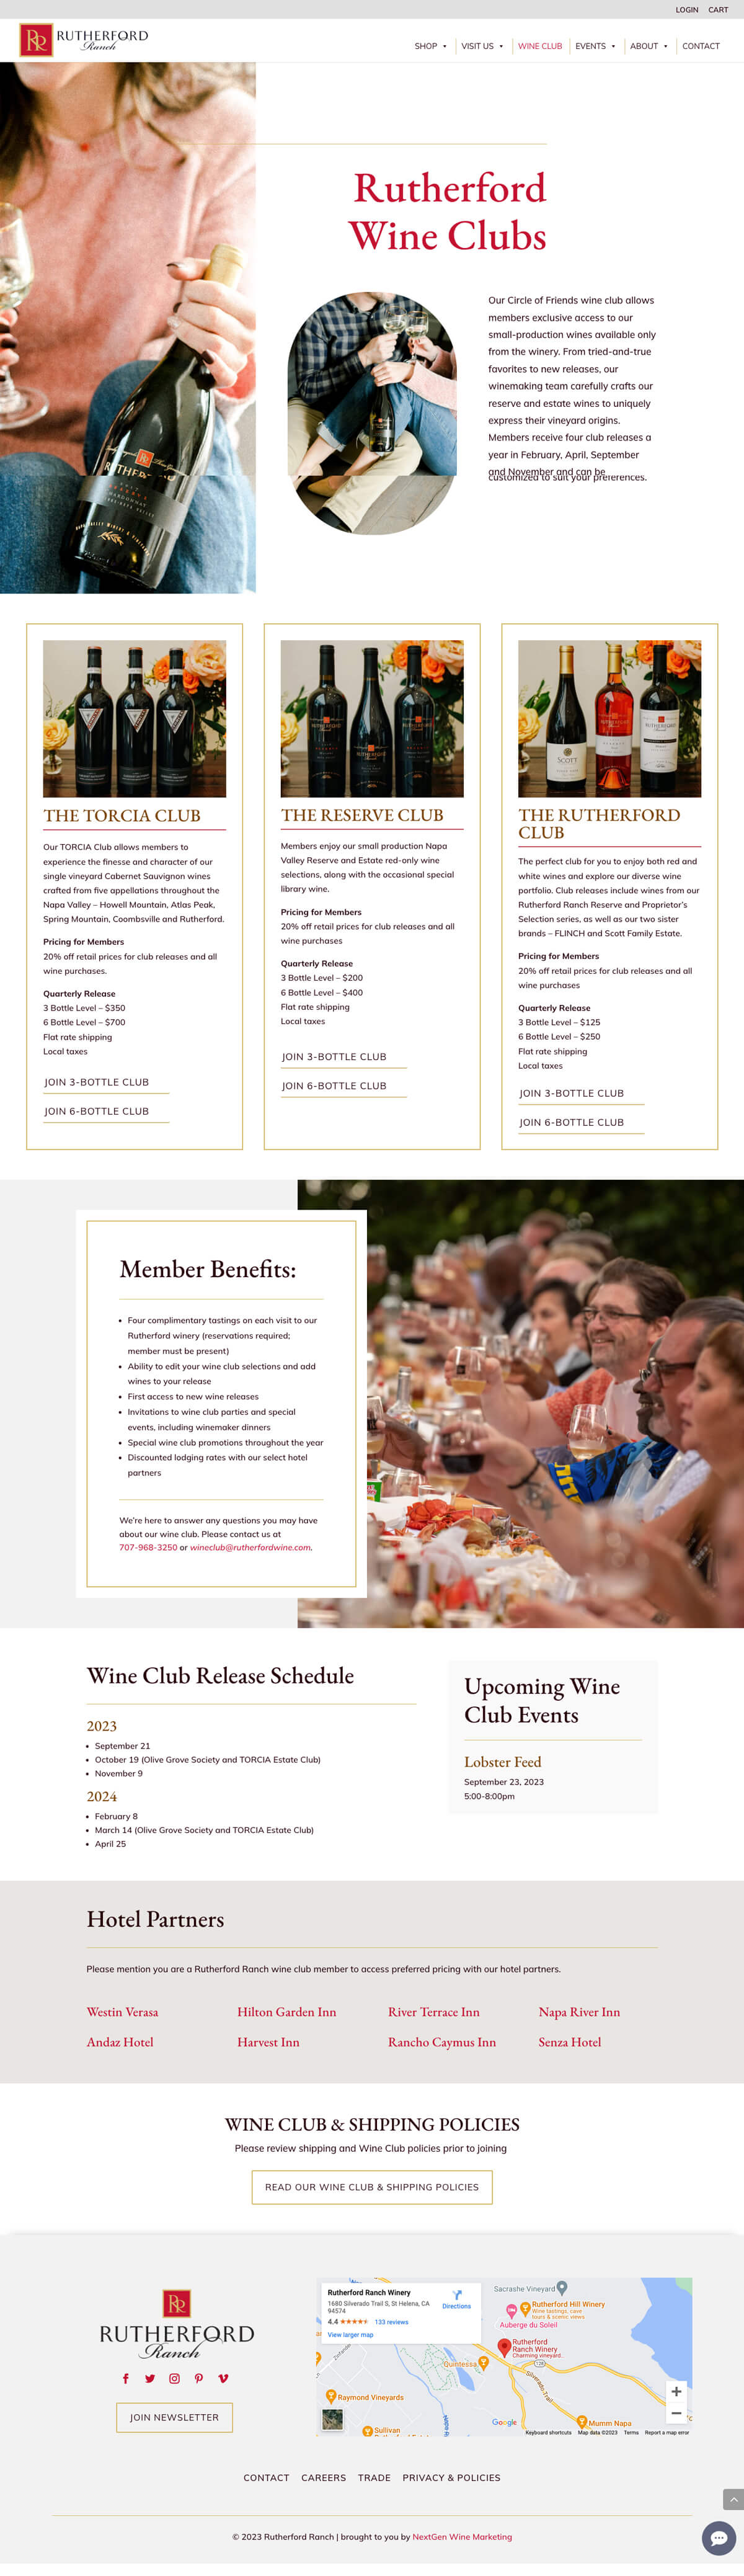 rutherford ranch wine clubs page